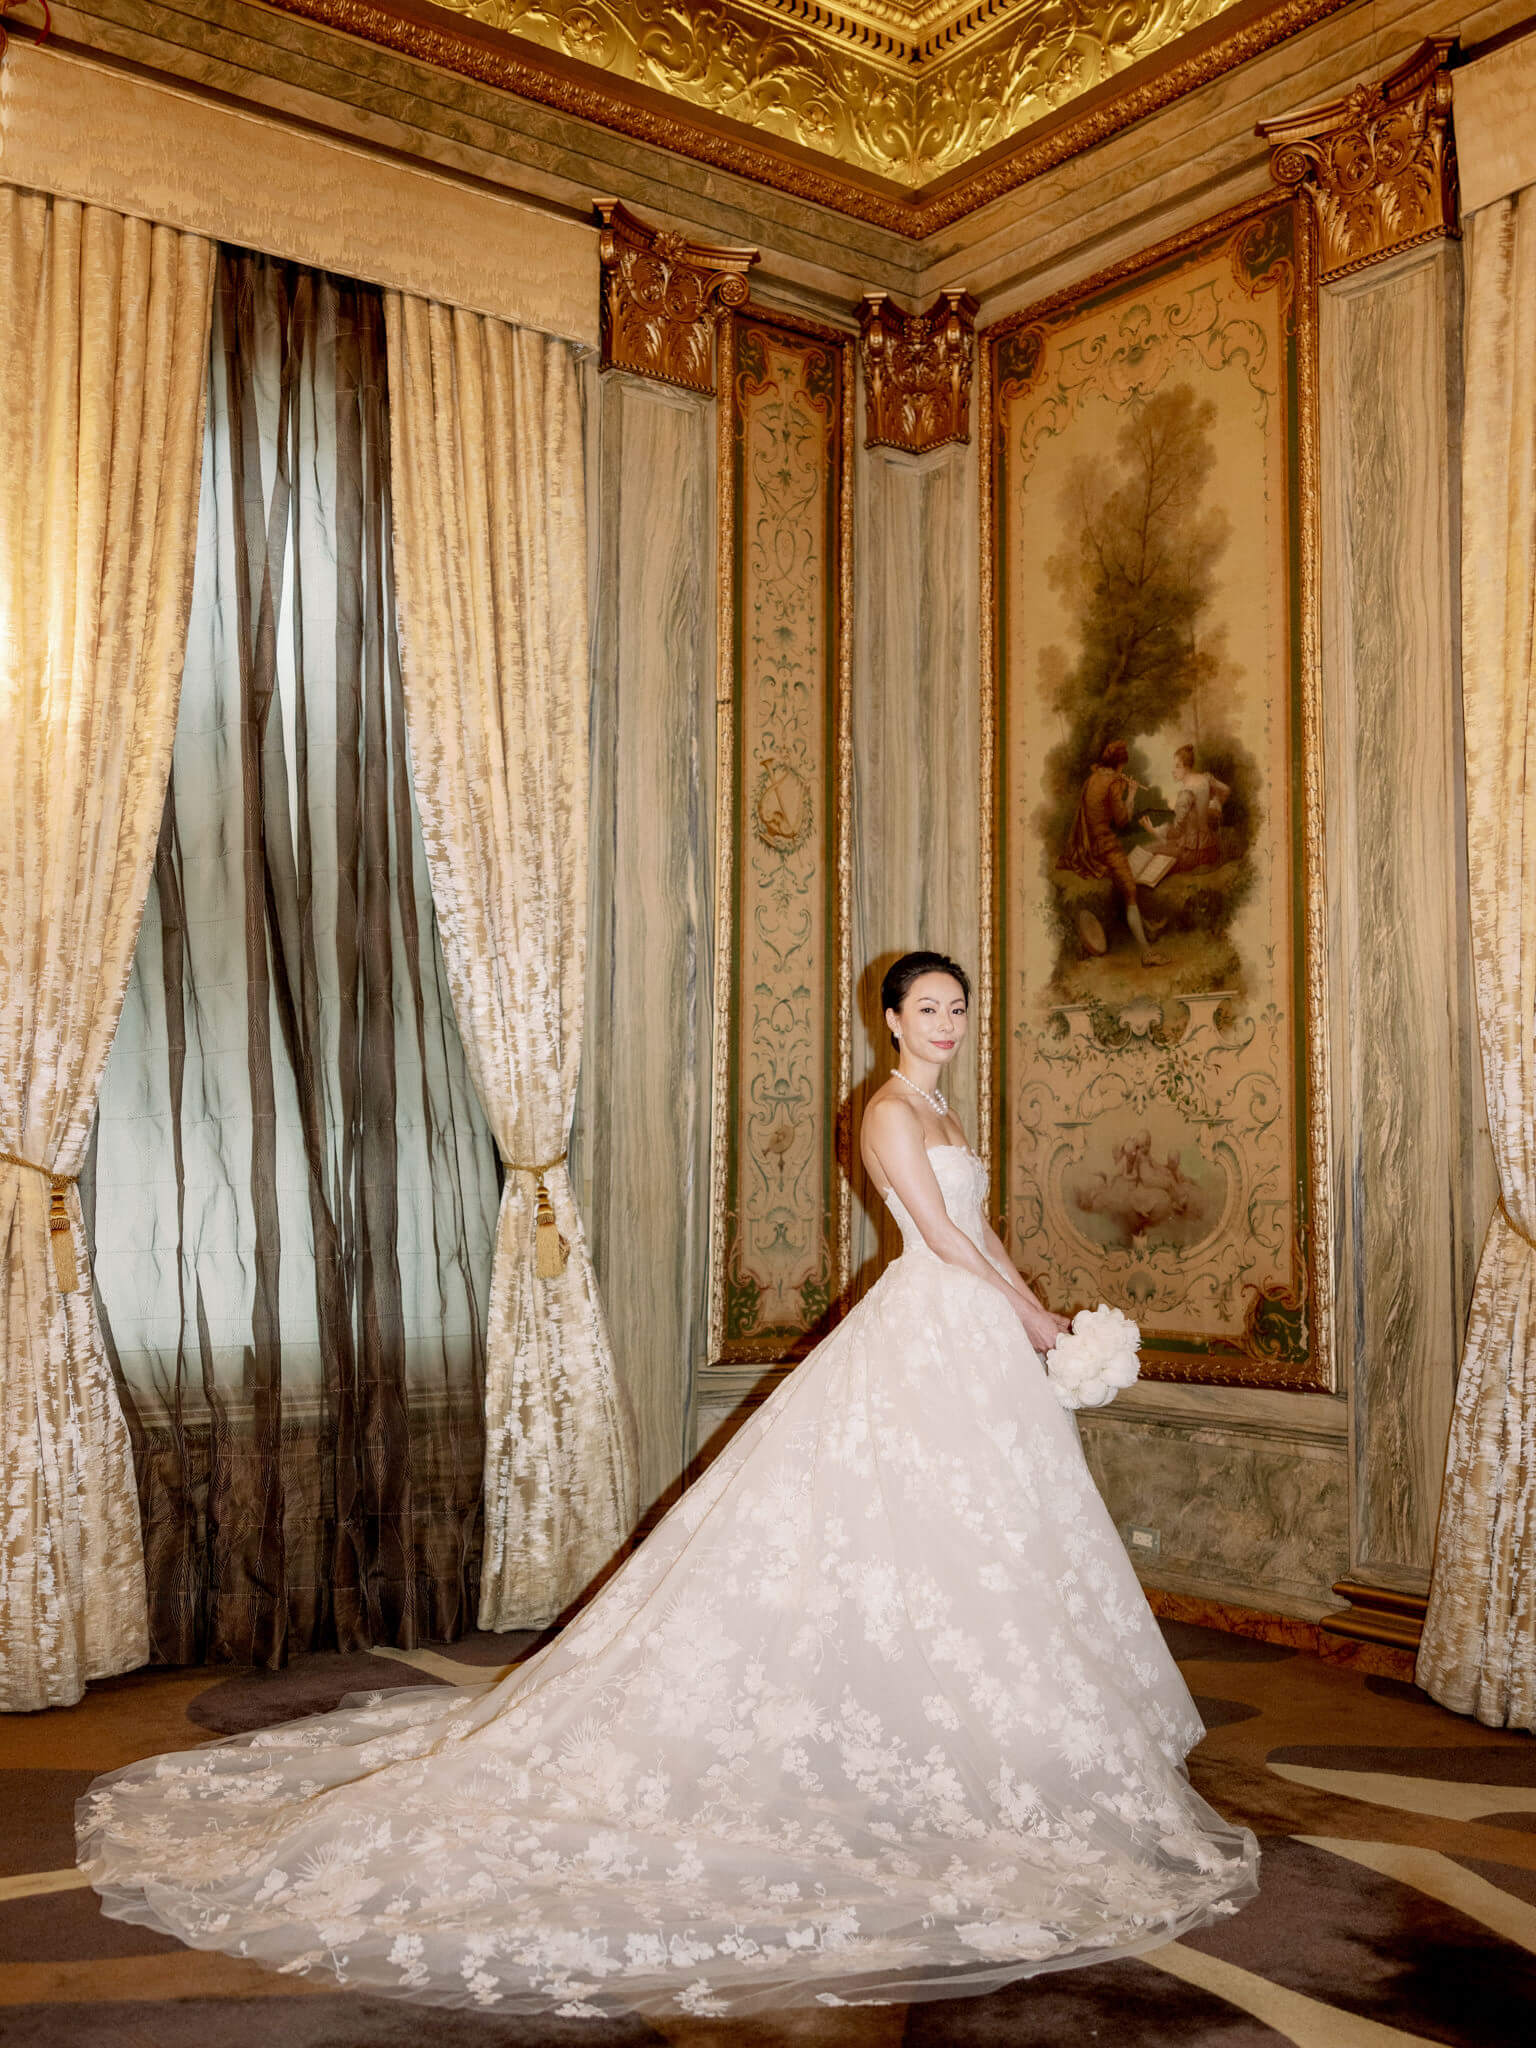 The bride is inside  Lotte New York Palace, with elegant interiors in the background. Image by Jenny Fu Studio